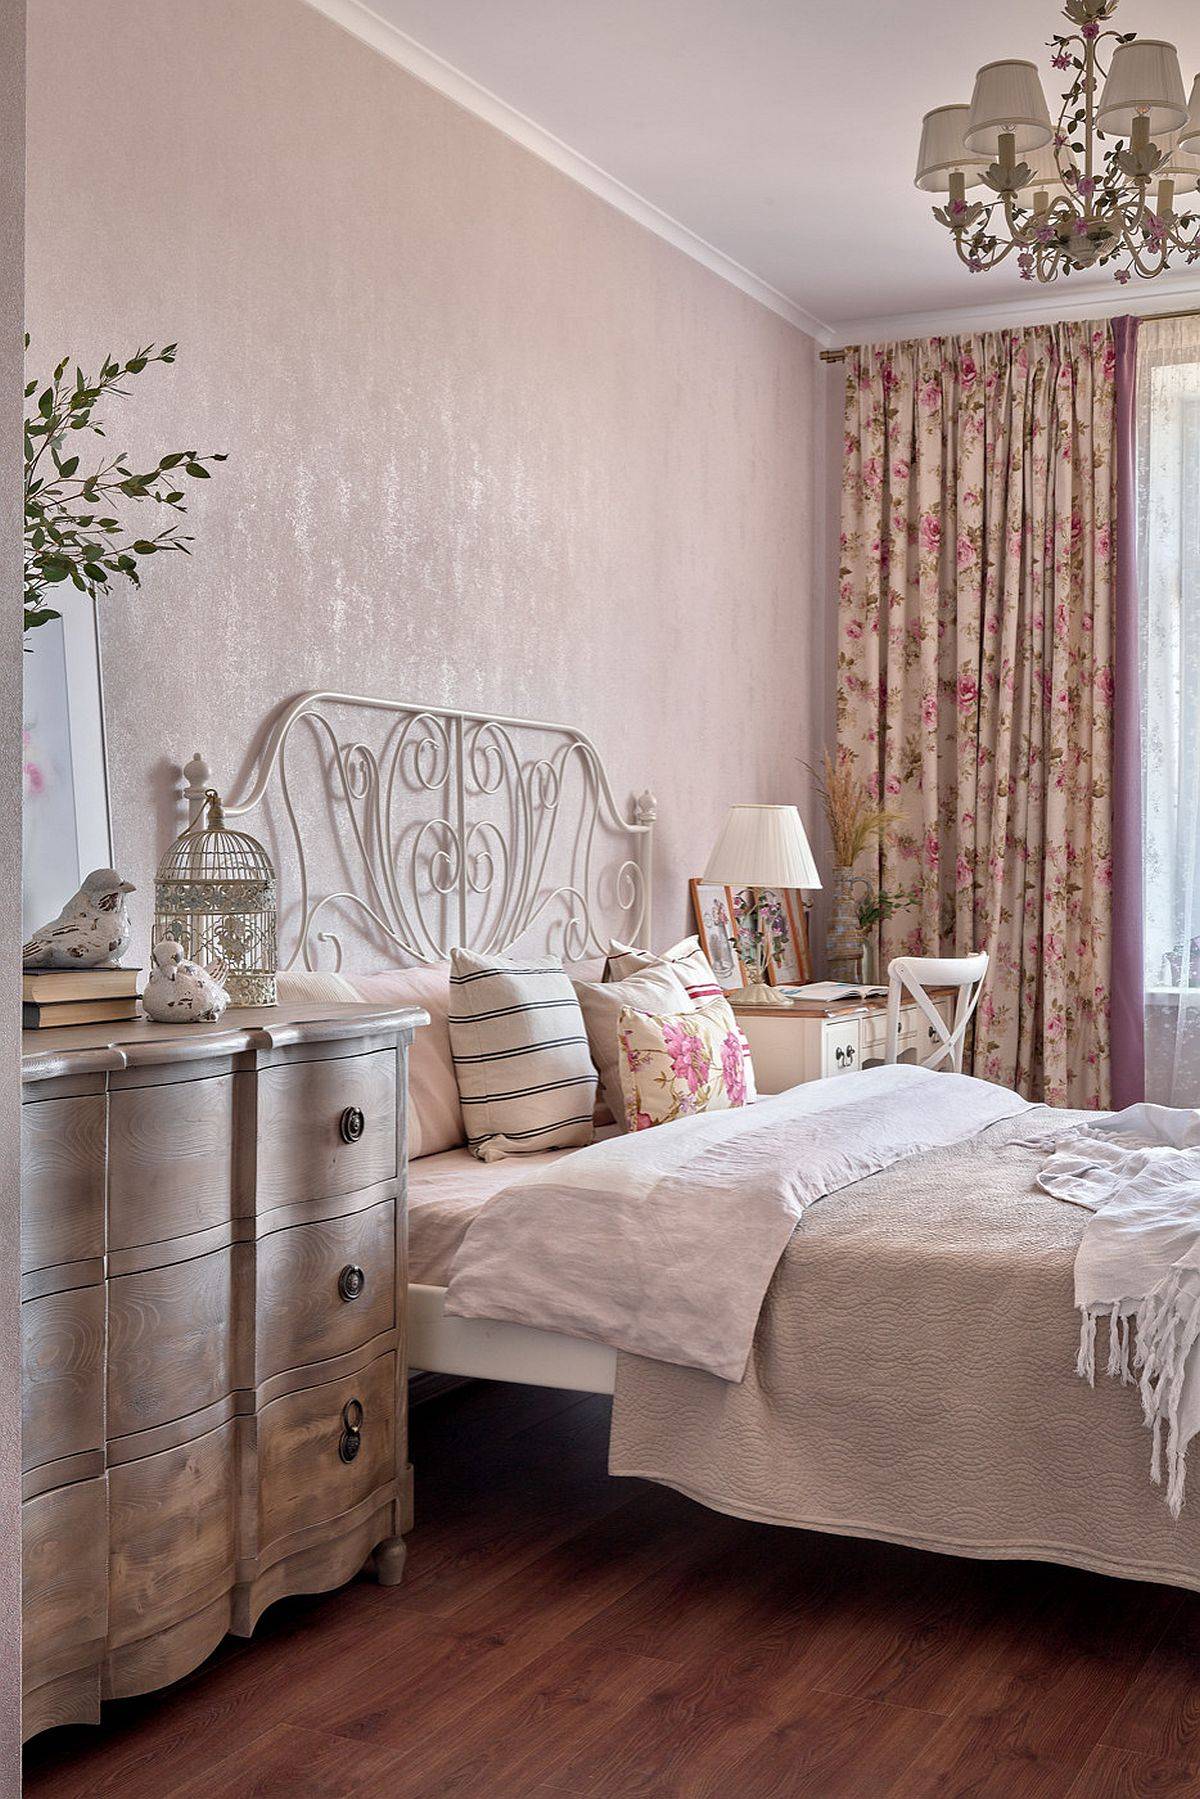 Pastel hues and floral patterns accentuate the shabby chic appeal of this modern bedroom